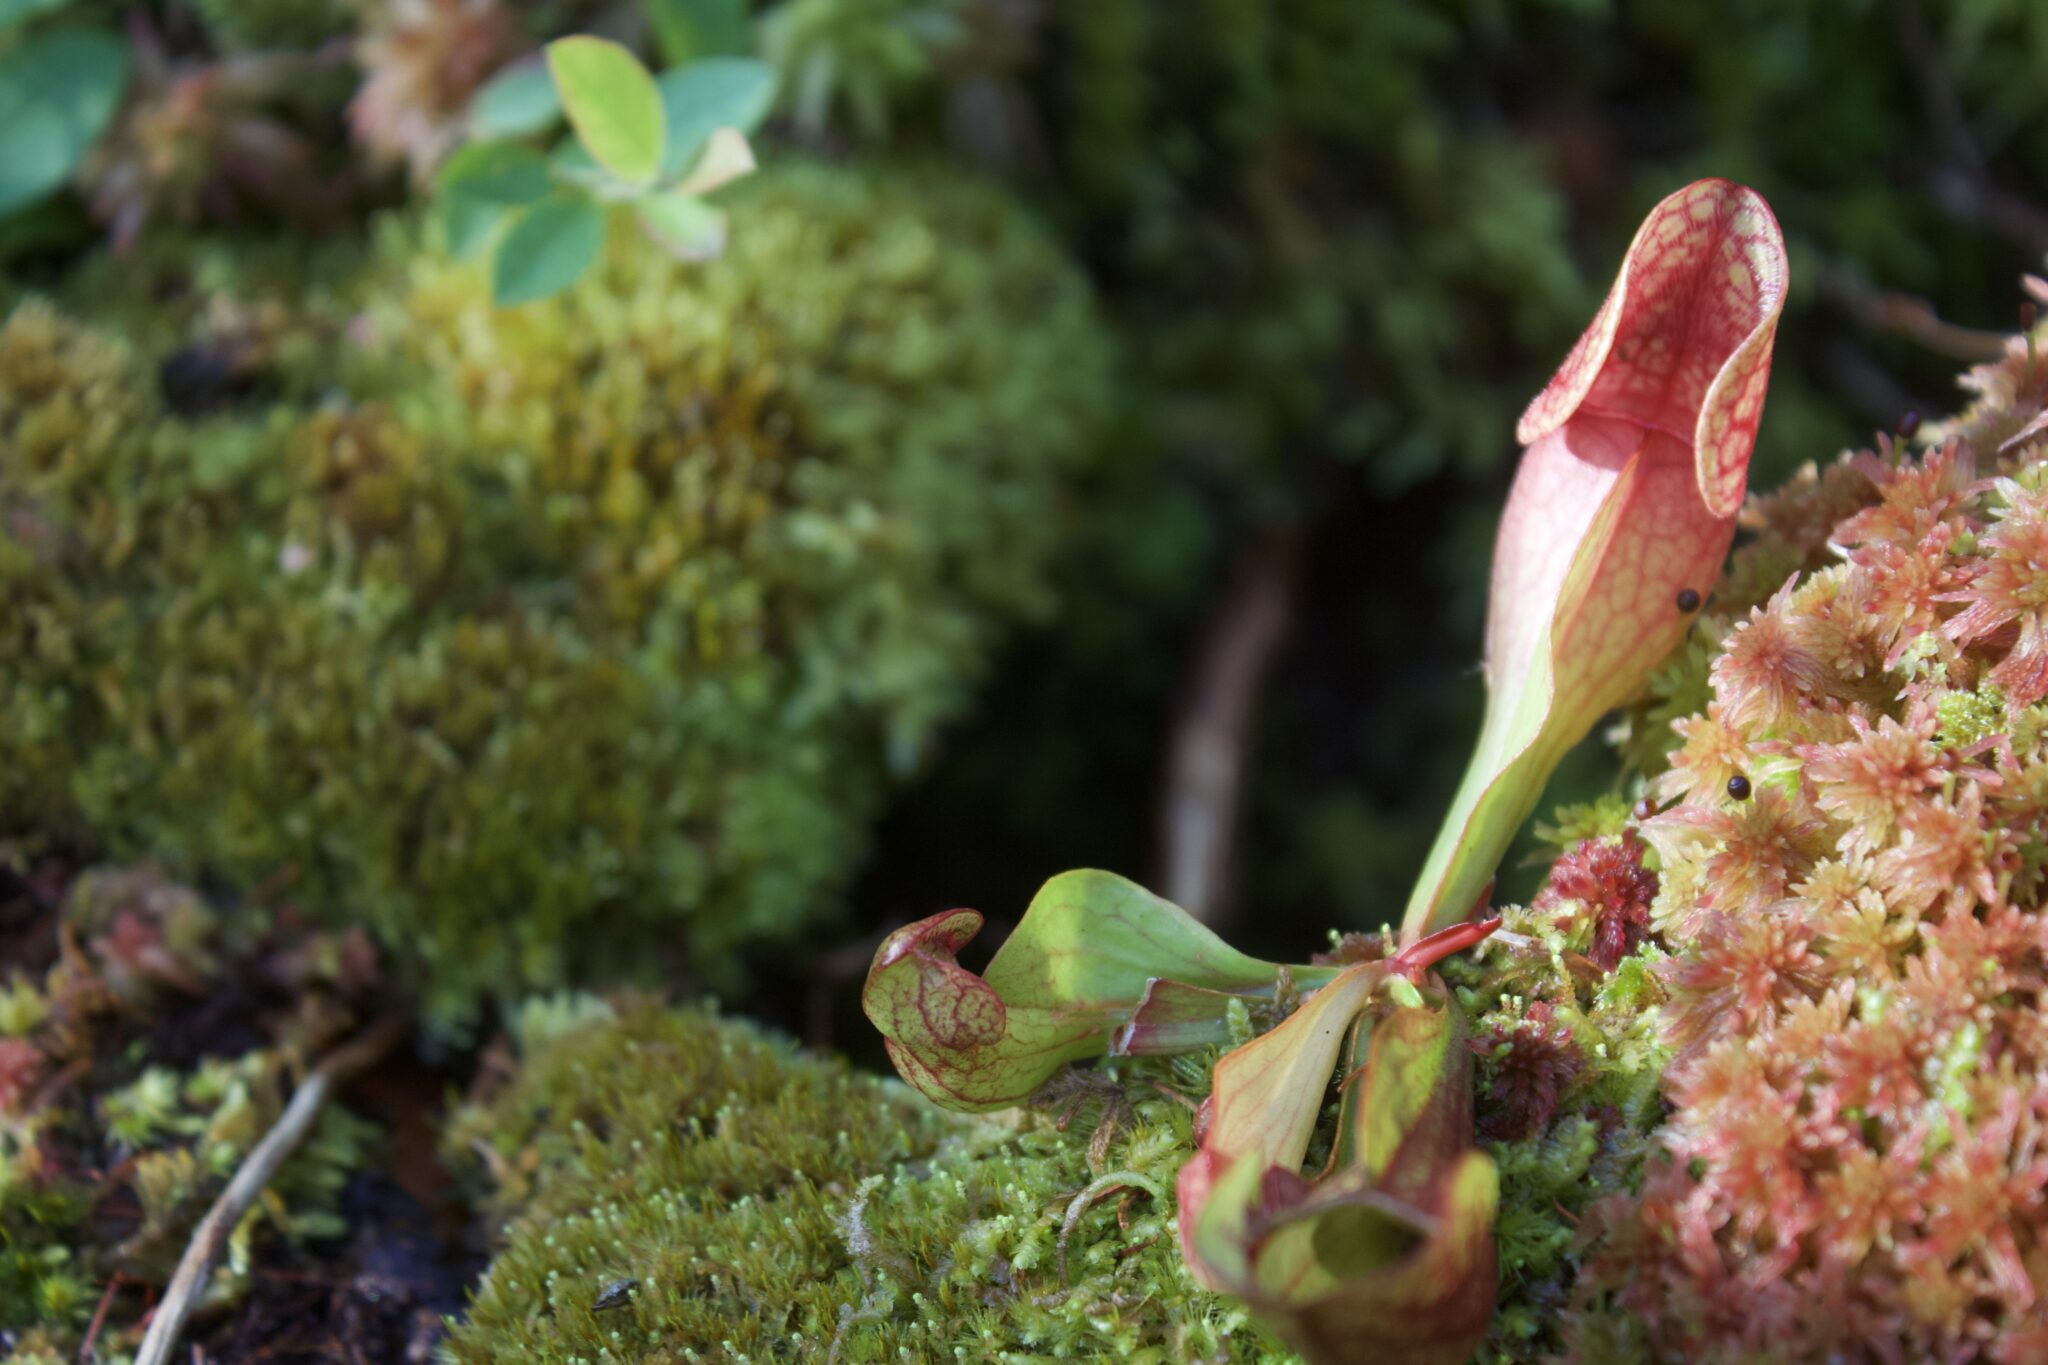 A red and green pitcher plant grows on top of moss.